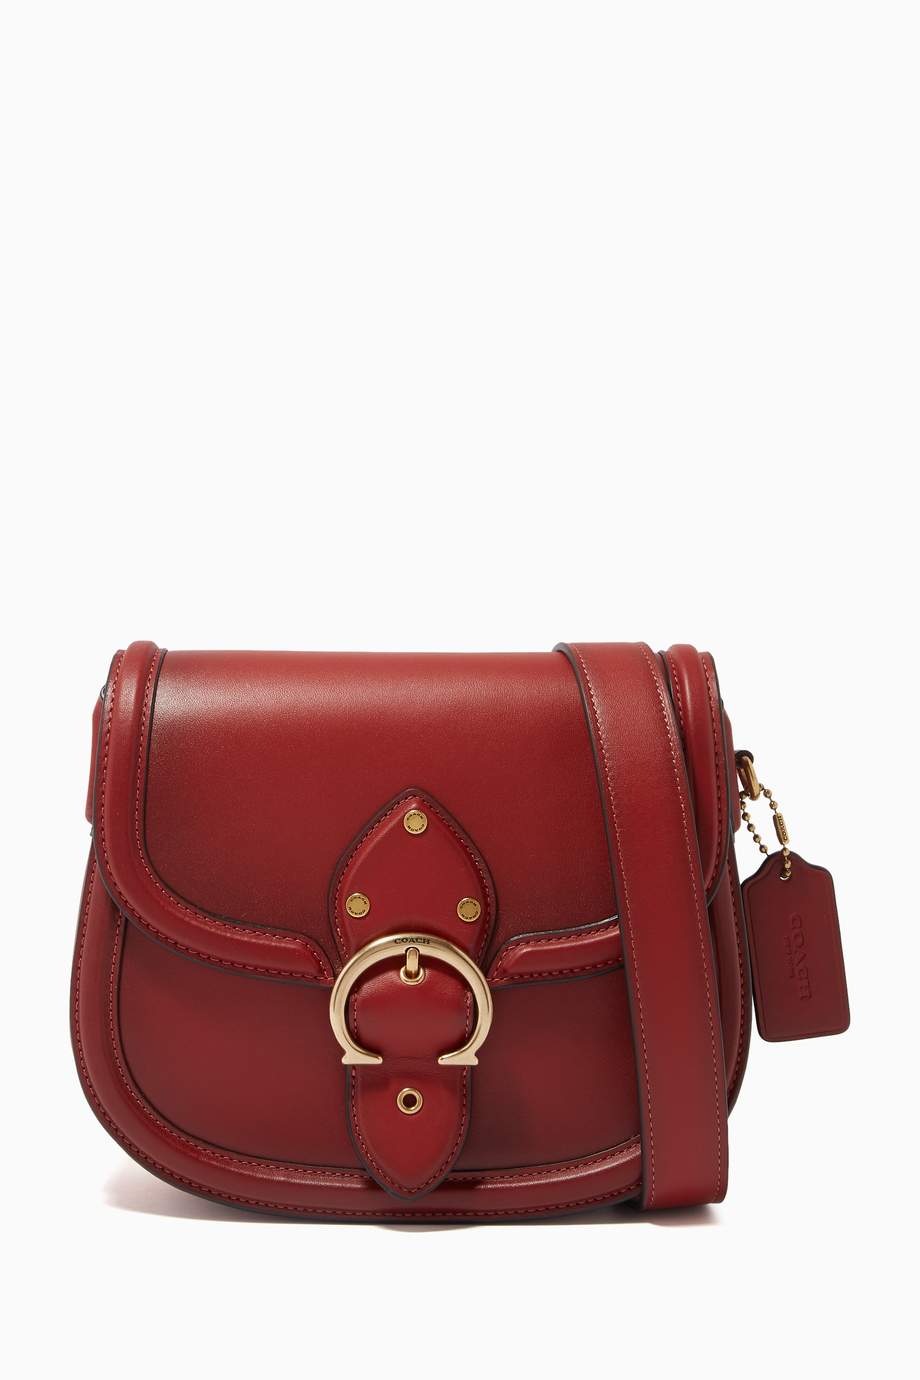 Shop Coach Red Beat Saddle Bag in Leather for Women | Ounass UAE